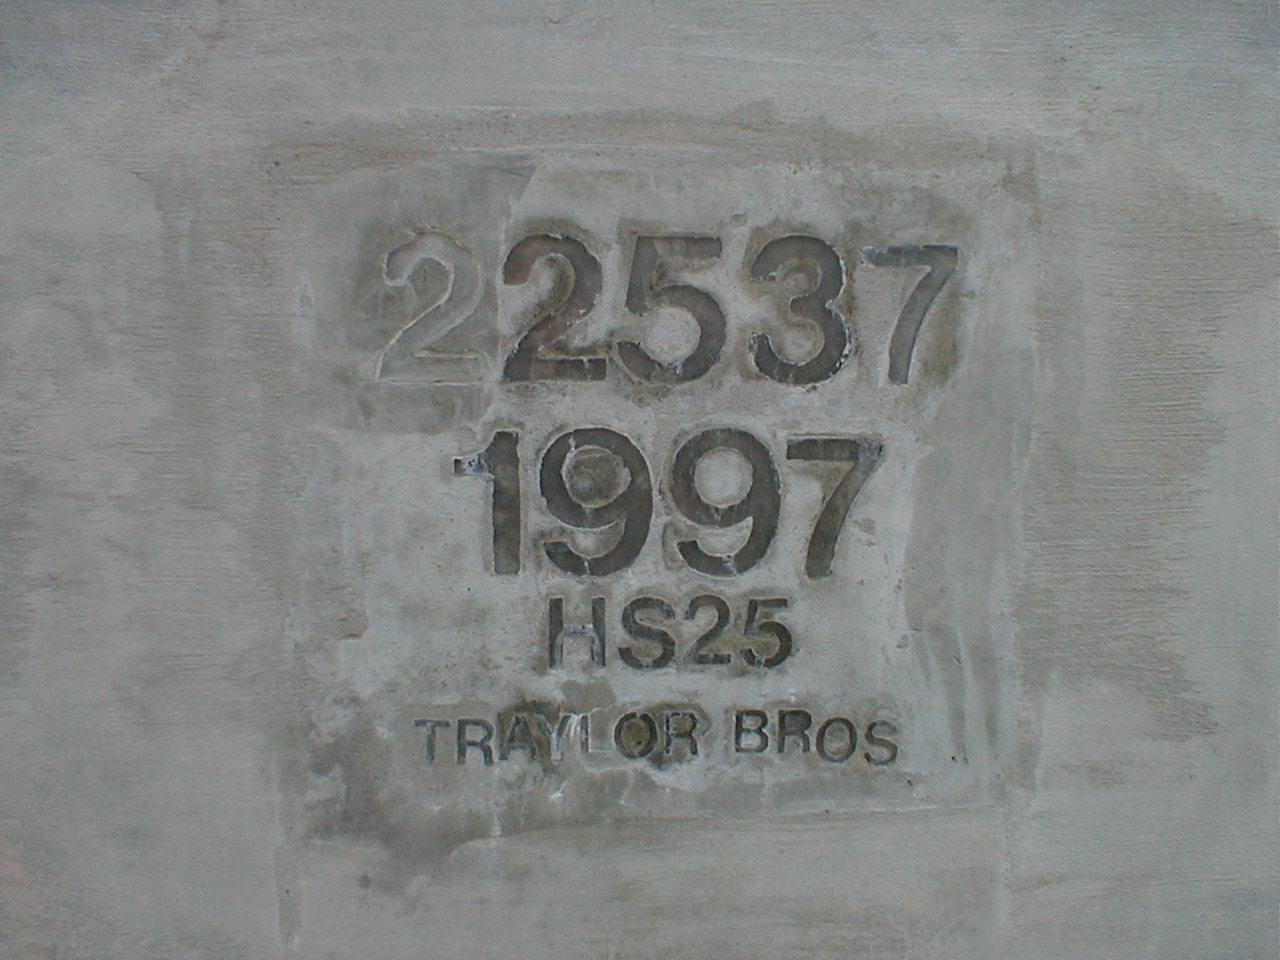 An inscription in eastern barricade at the Kentucky end of the bridge.